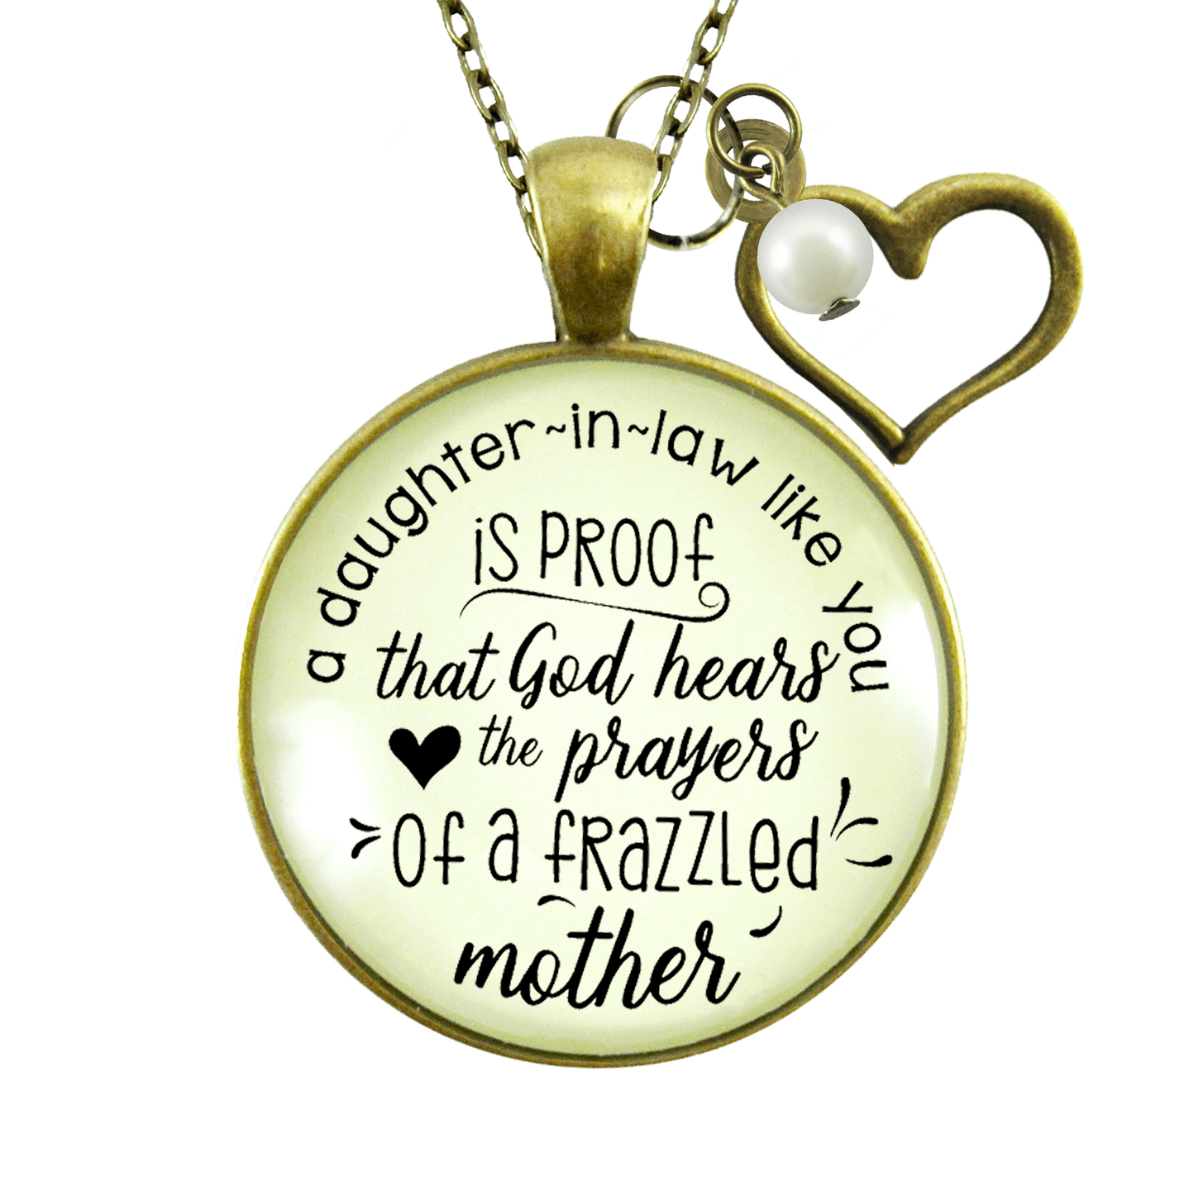 Gutsy Goodness Daughter in Law Gift Necklace Proof God Hears Prayers Wedding Jewelry Gift - Gutsy Goodness;Daughter In Law Gift Necklace Proof God Hears Prayers Wedding Jewelry Gift - Gutsy Goodness Handmade Jewelry Gifts